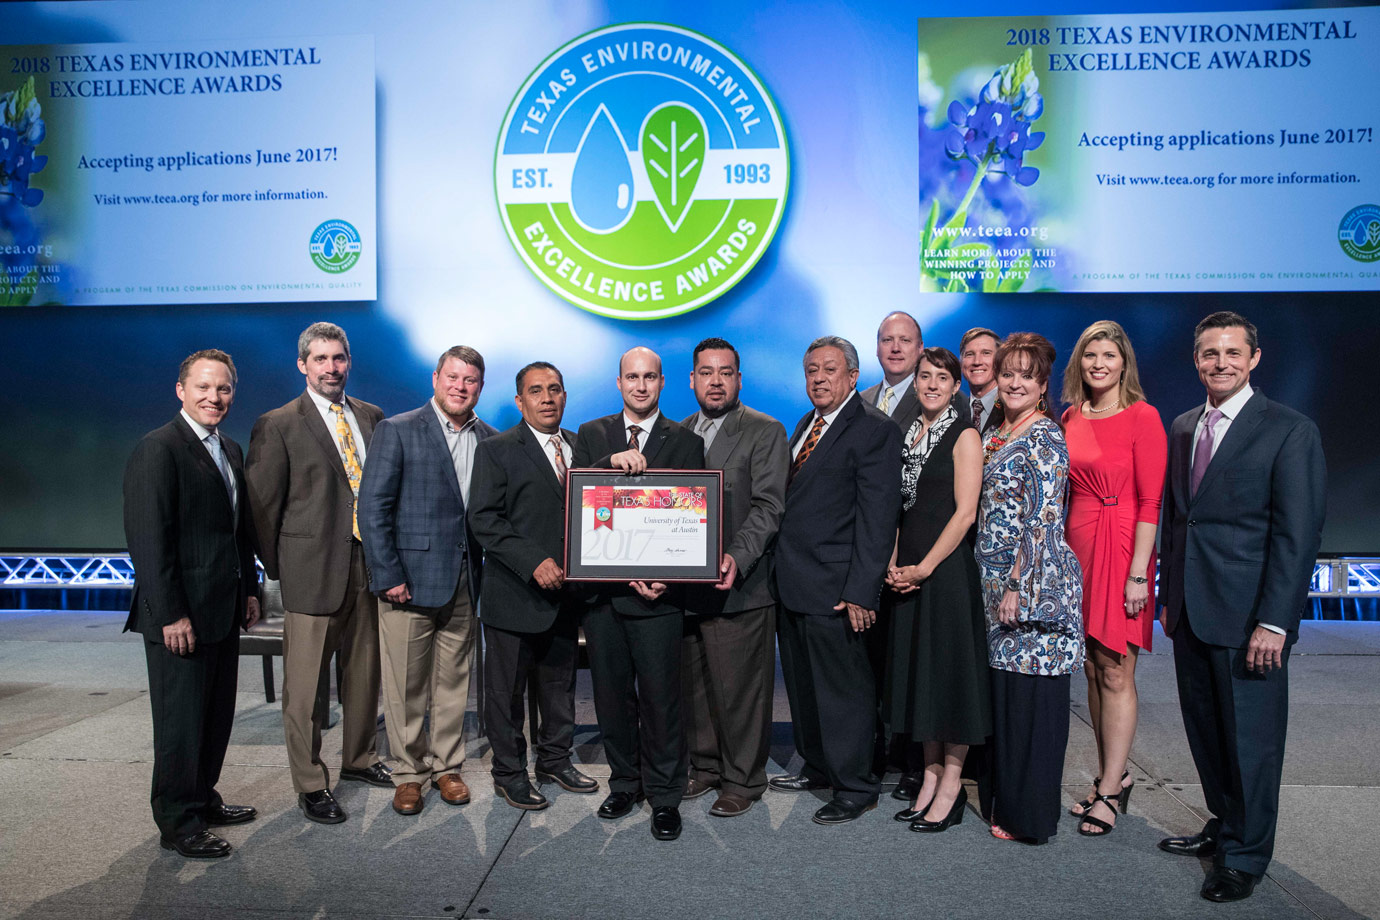 UT Austin winners of a 2017 Texas Environmental Excellence Award from the TCEQ